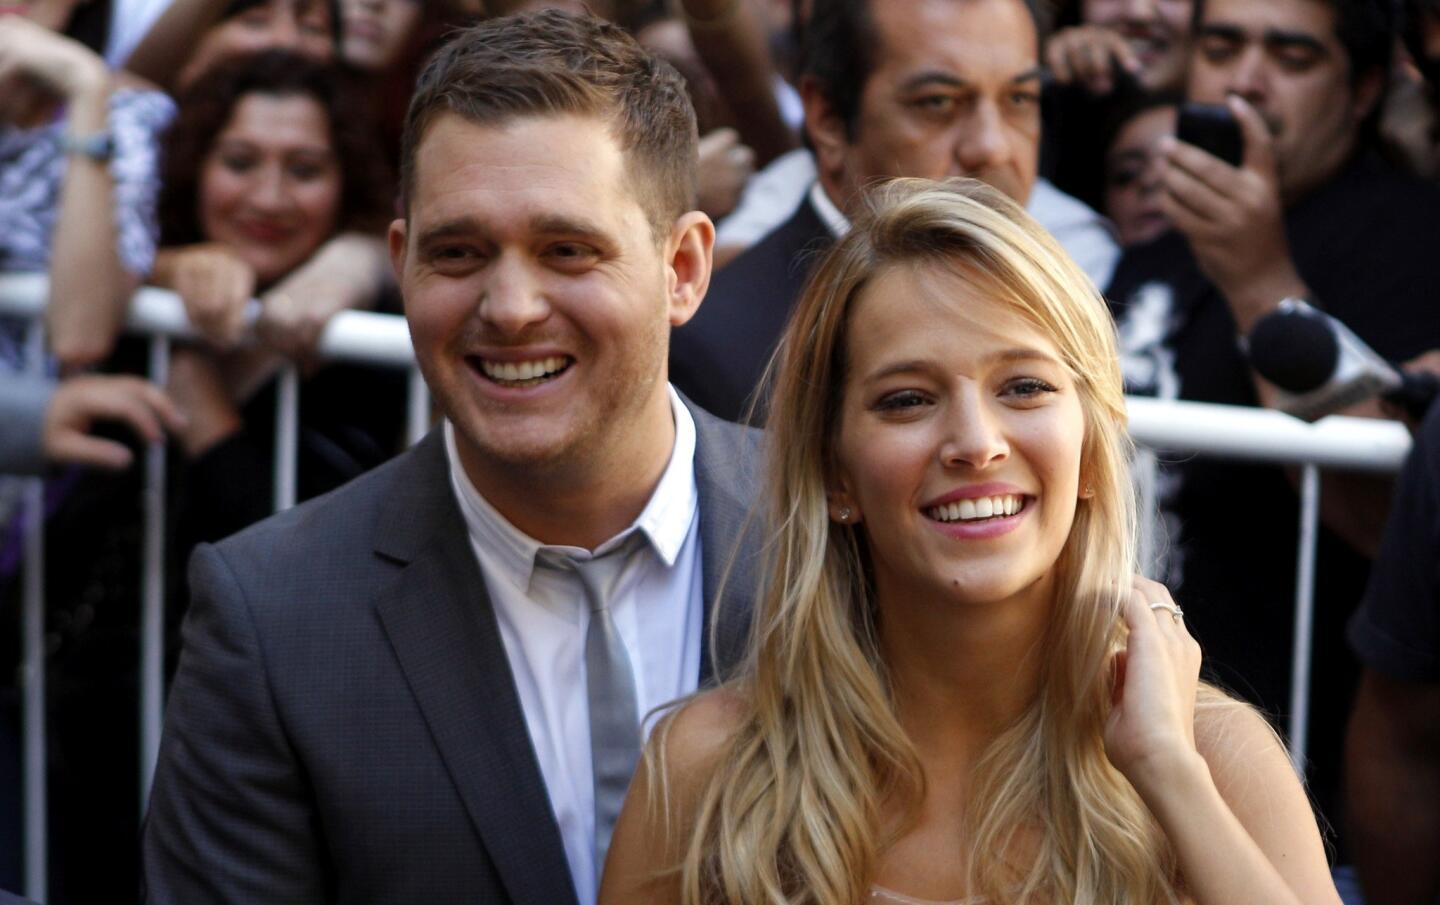 Michael Buble expecting baby boy, won't name him after pope